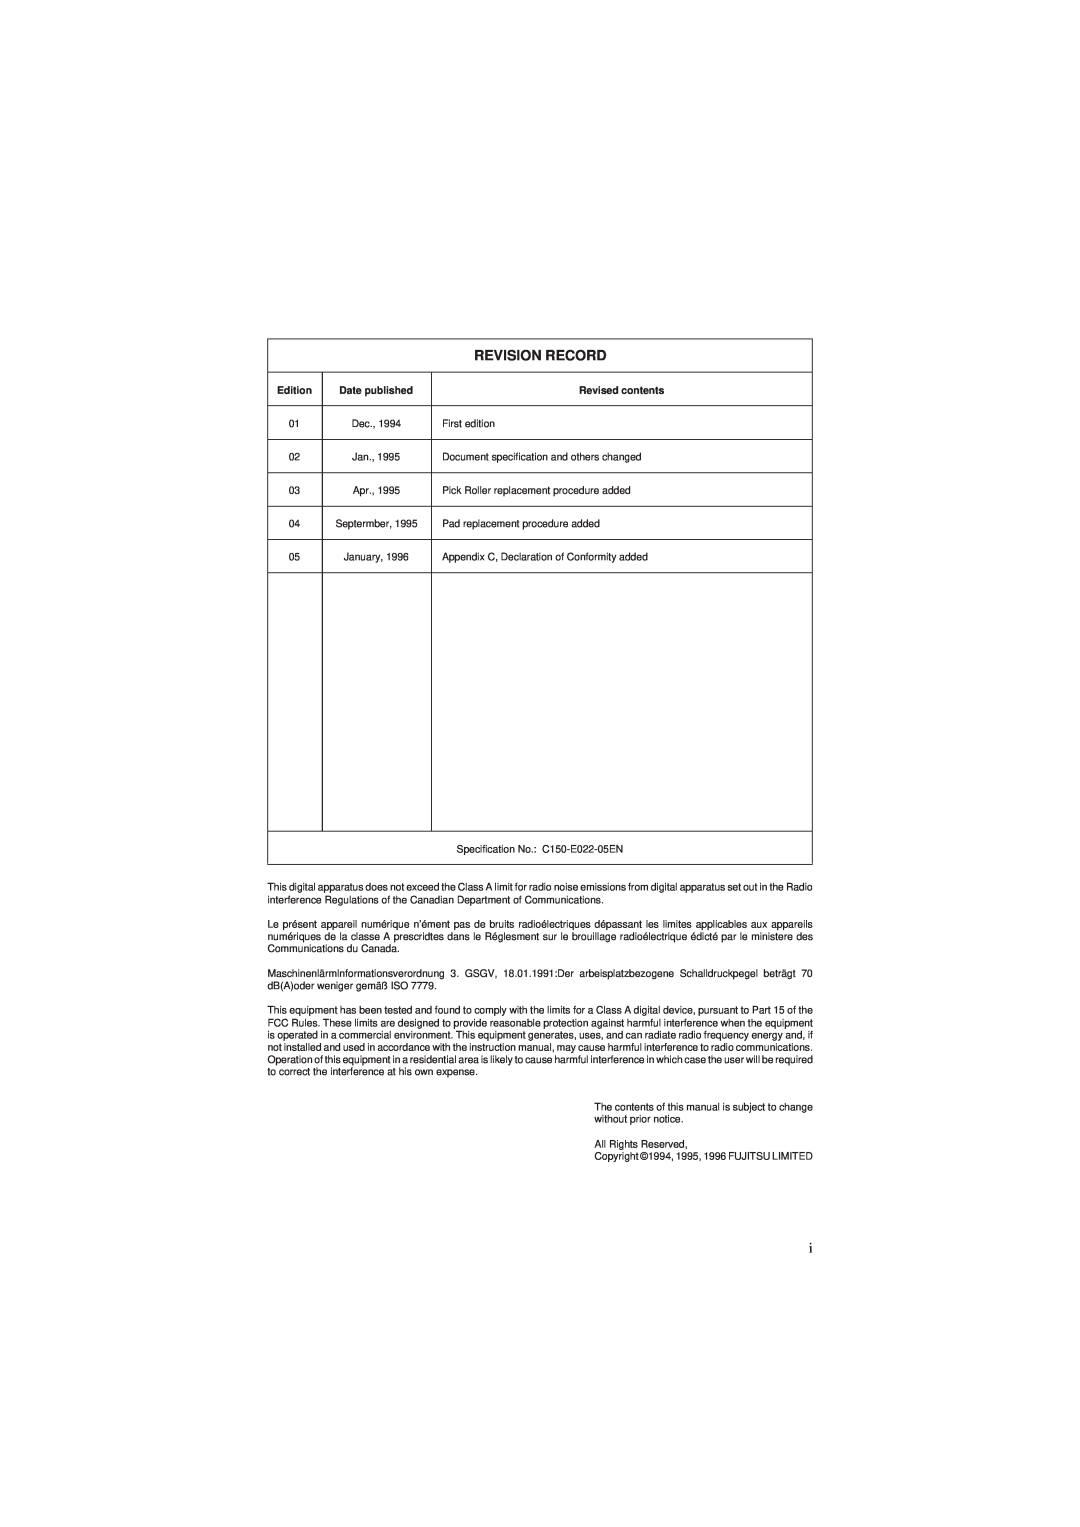 Fujitsu M3093EX, M3093GX manual Revision Record, Edition, Date published, Revised contents 